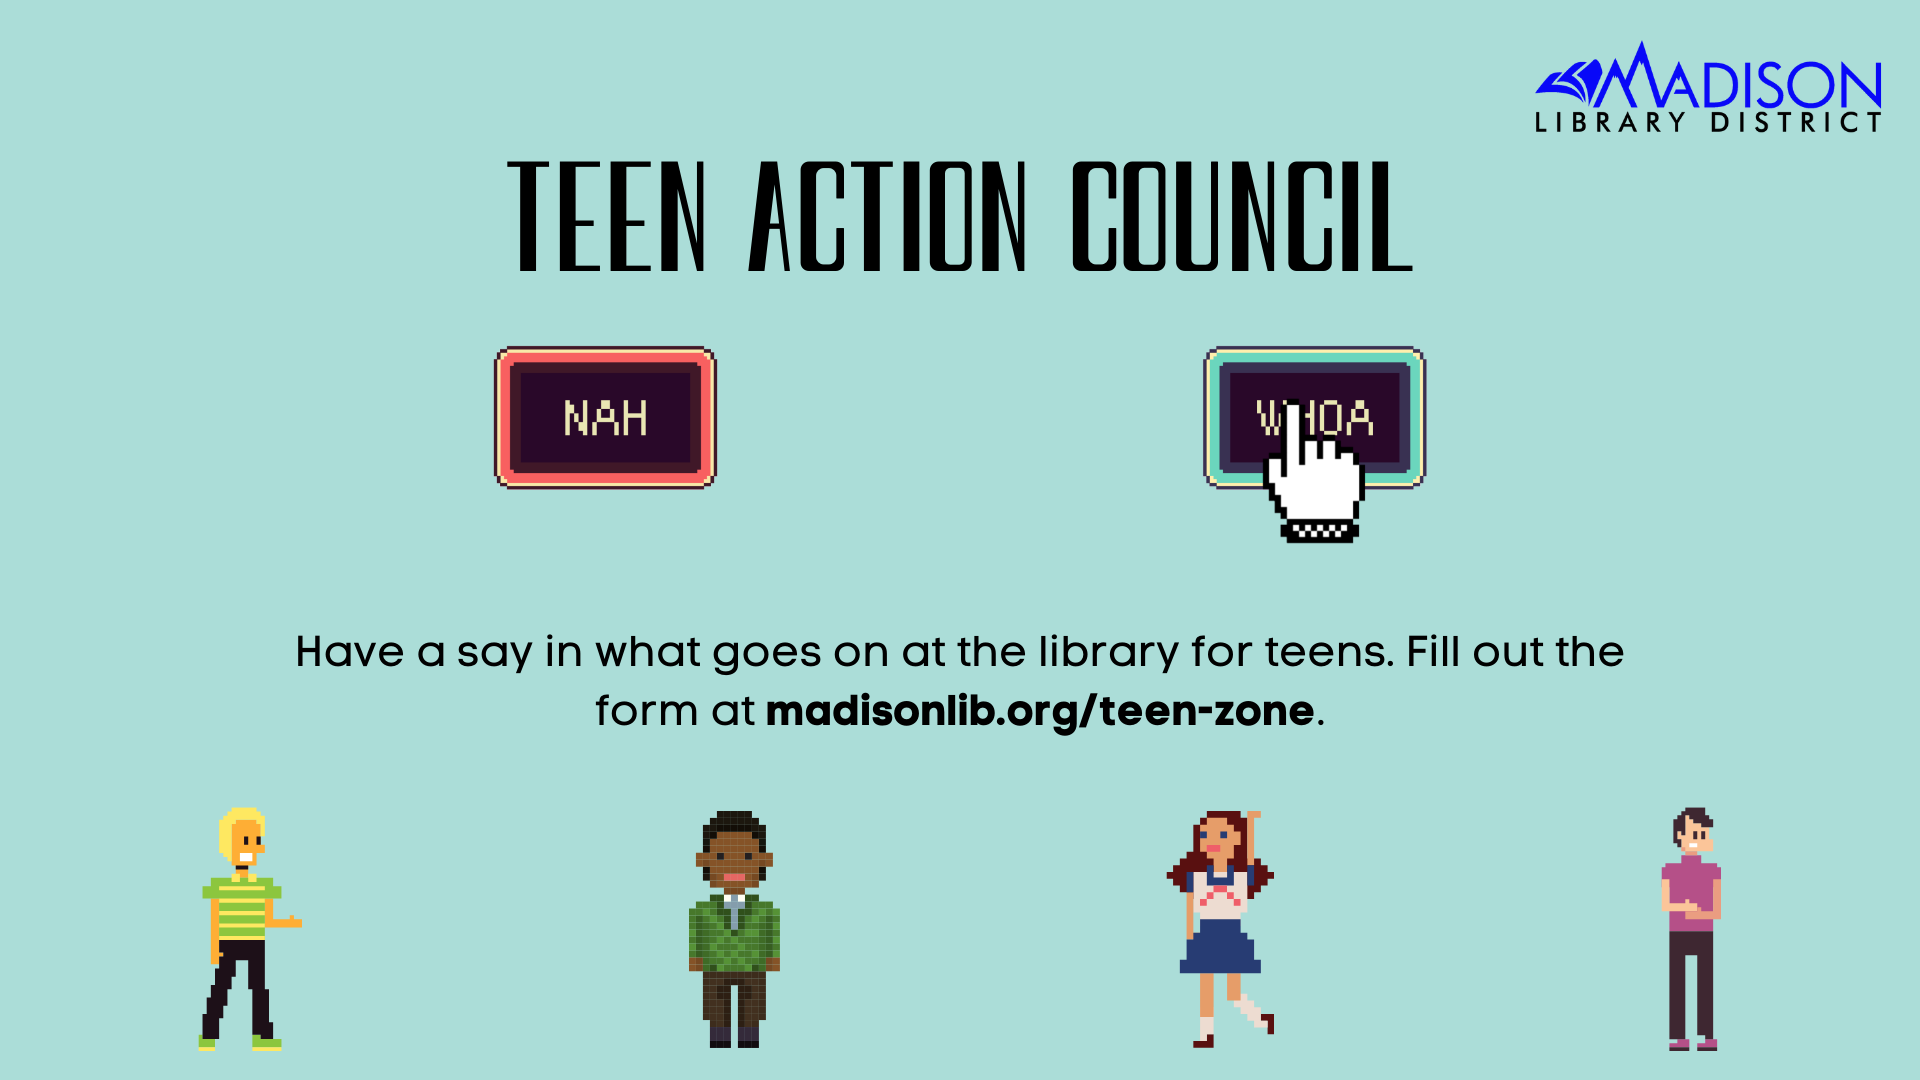 Teen action council have a say in what goes on at the library for teens